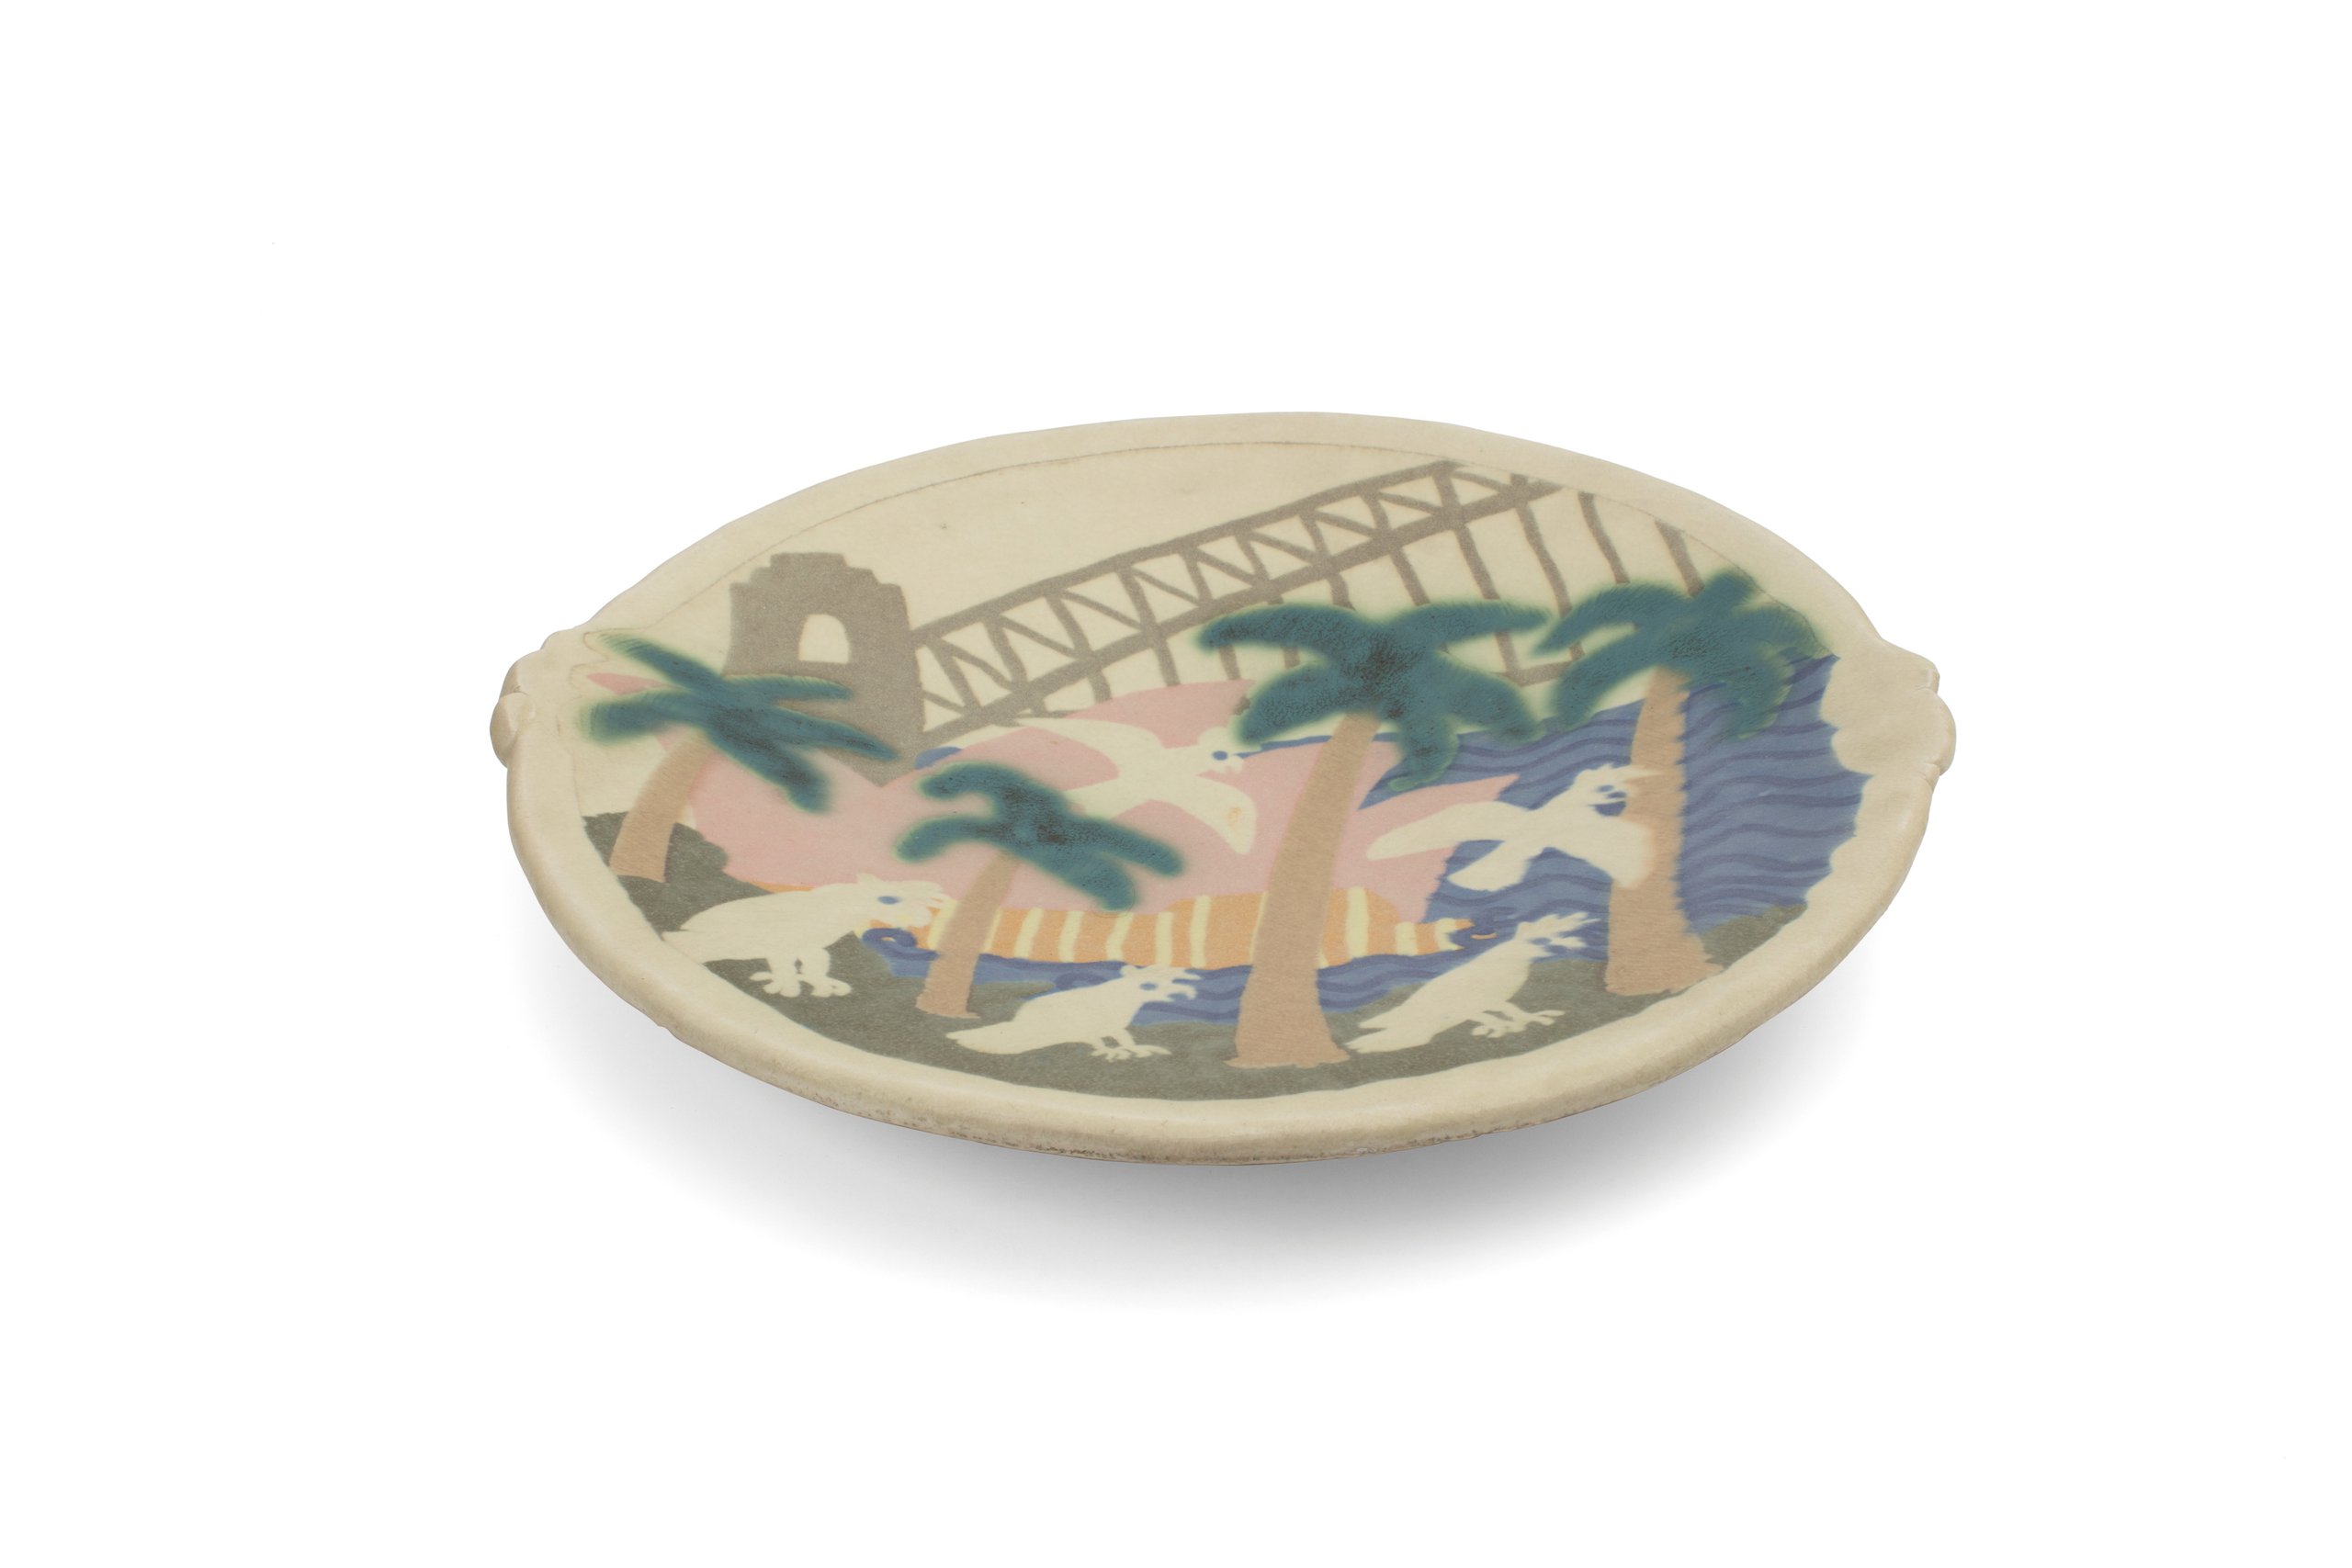 'Sydney Harbour and cockatoos' platter made by Sandra Taylor